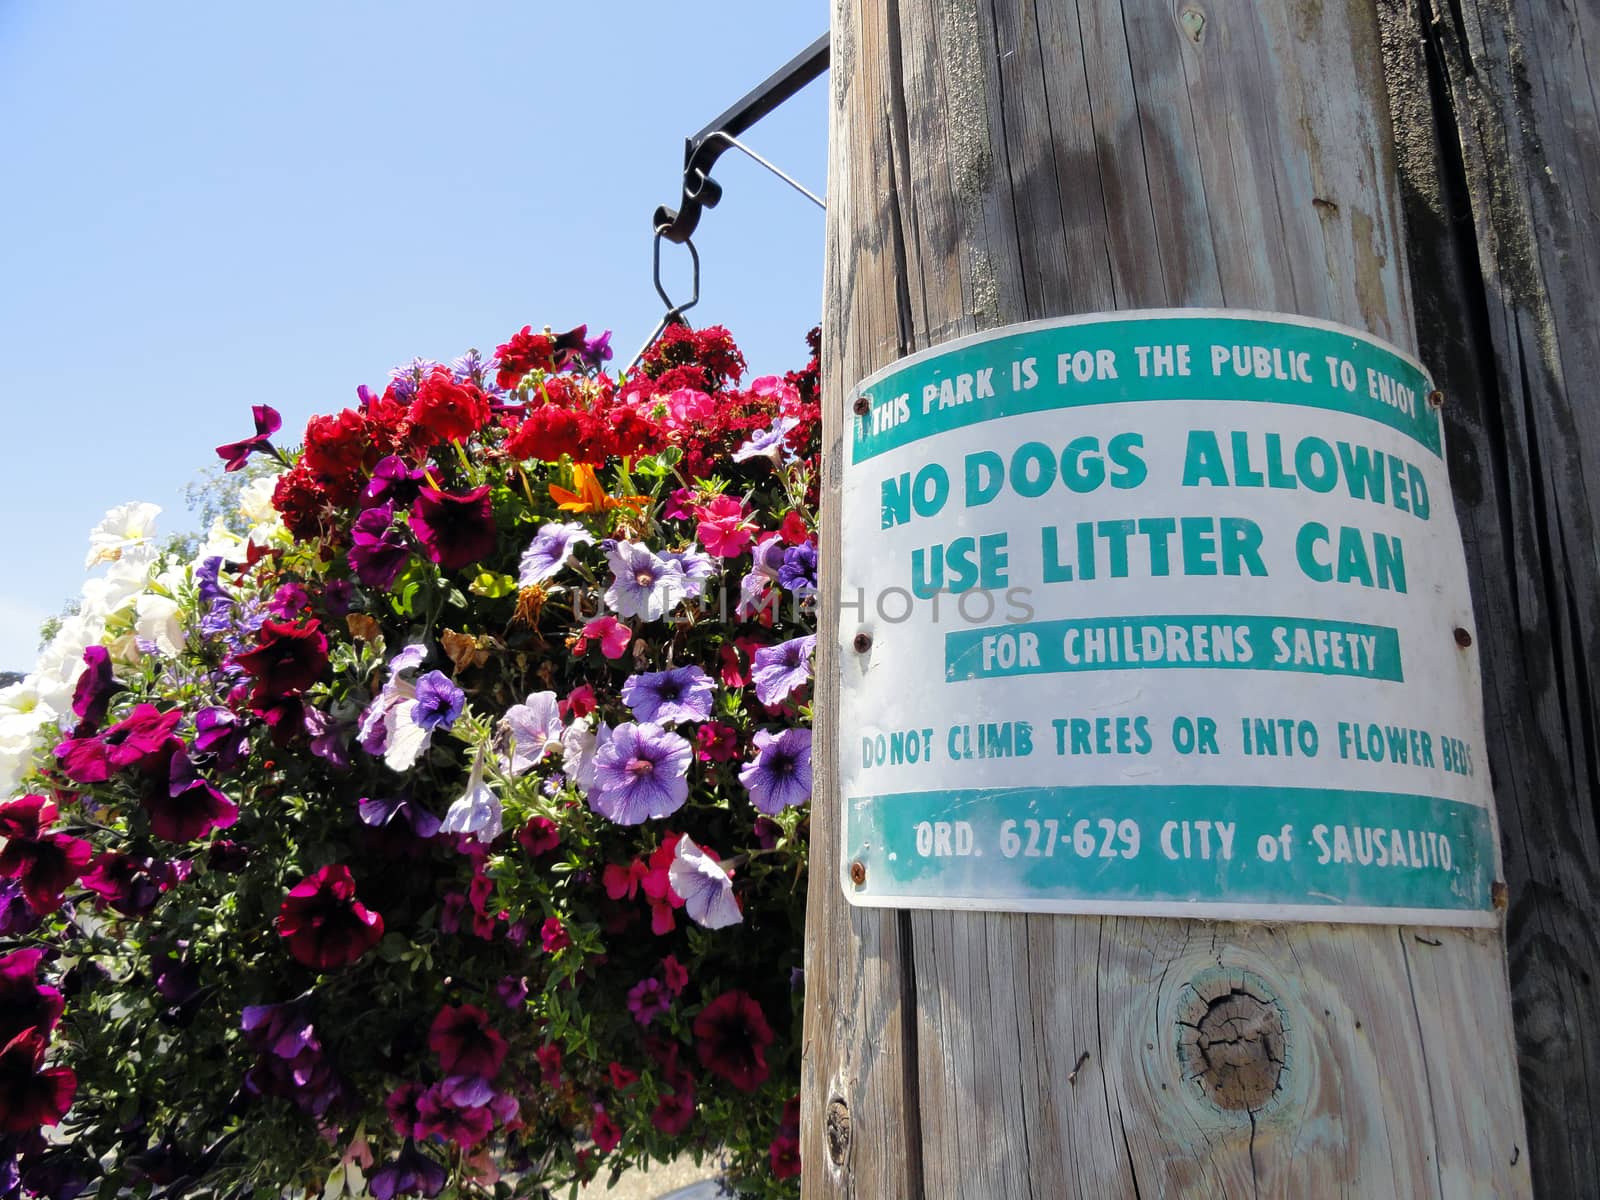 SAUSALITO - JUL 22 : No Dogs Allowed Sign (Use Litter Can For Childrens Safety...) on Wooden Pole in the Park, Northern California on July 22, 2010 in Sausalito, USA